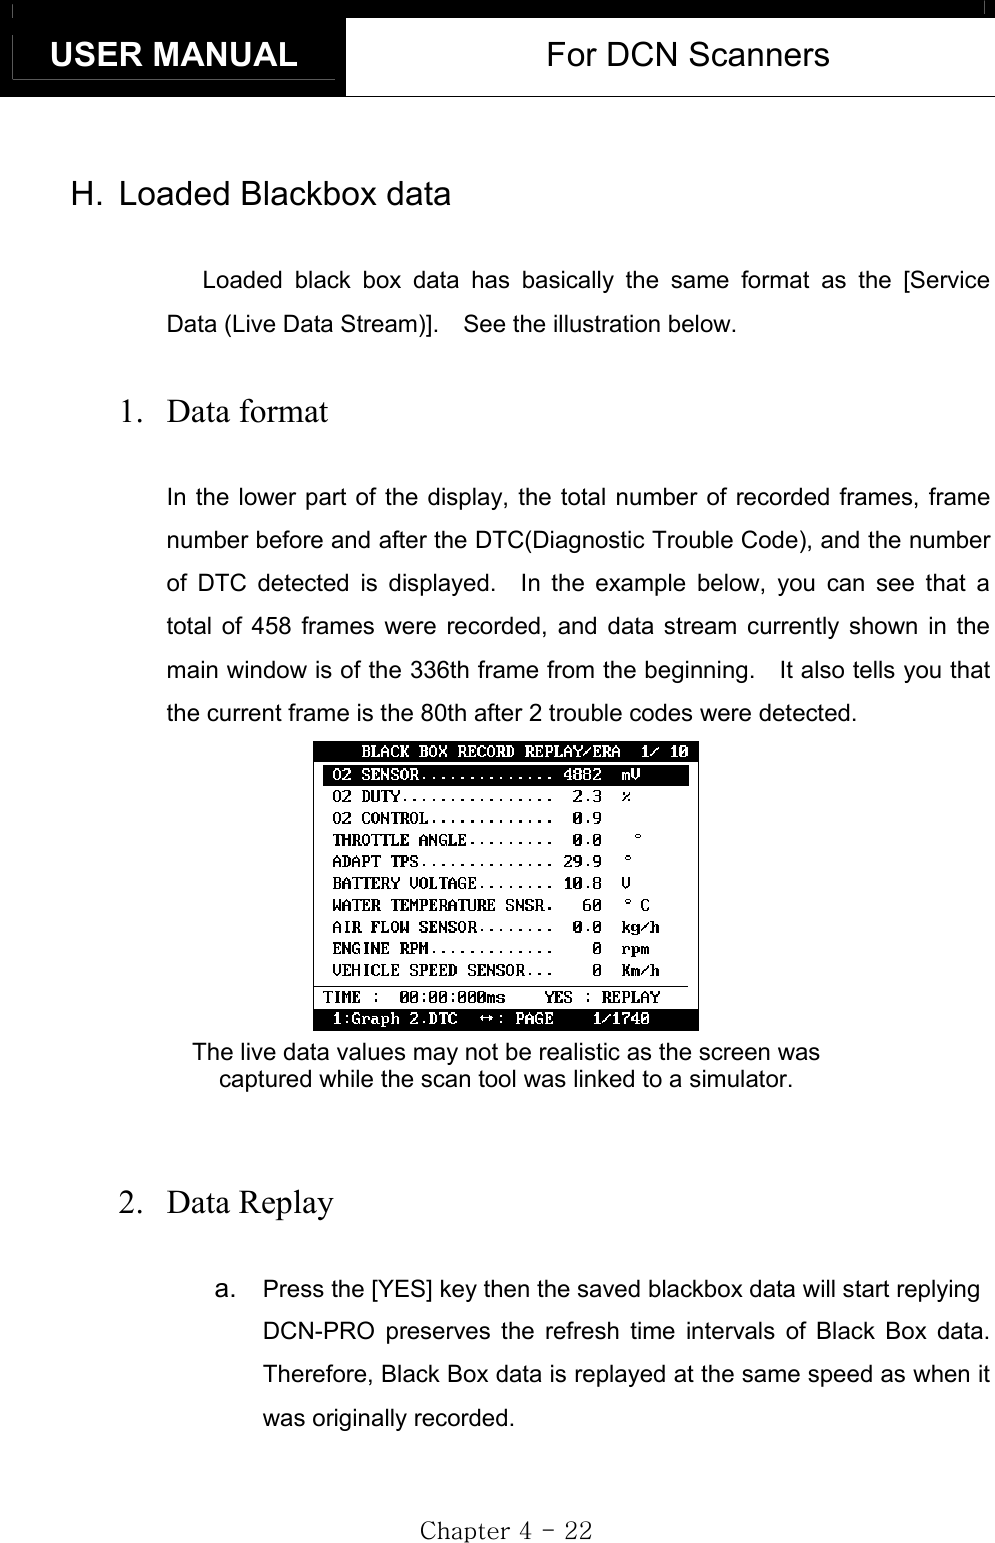 USER MANUAL  For DCN Scanners GjG[GTGYYGH.  Loaded Blackbox data Loaded black box data has basically the same format as the [Service Data (Live Data Stream)].    See the illustration below. 1. Data format In the lower part of the display, the total number of recorded frames, frame number before and after the DTC(Diagnostic Trouble Code), and the number of DTC detected is displayed.  In the example below, you can see that a total of 458 frames were recorded, and data stream currently shown in the main window is of the 336th frame from the beginning.    It also tells you that the current frame is the 80th after 2 trouble codes were detected. The live data values may not be realistic as the screen was   captured while the scan tool was linked to a simulator. 2. Data Replay a.  Press the [YES] key then the saved blackbox data will start replying DCN-PRO preserves the refresh time intervals of Black Box data.  Therefore, Black Box data is replayed at the same speed as when it was originally recorded. 